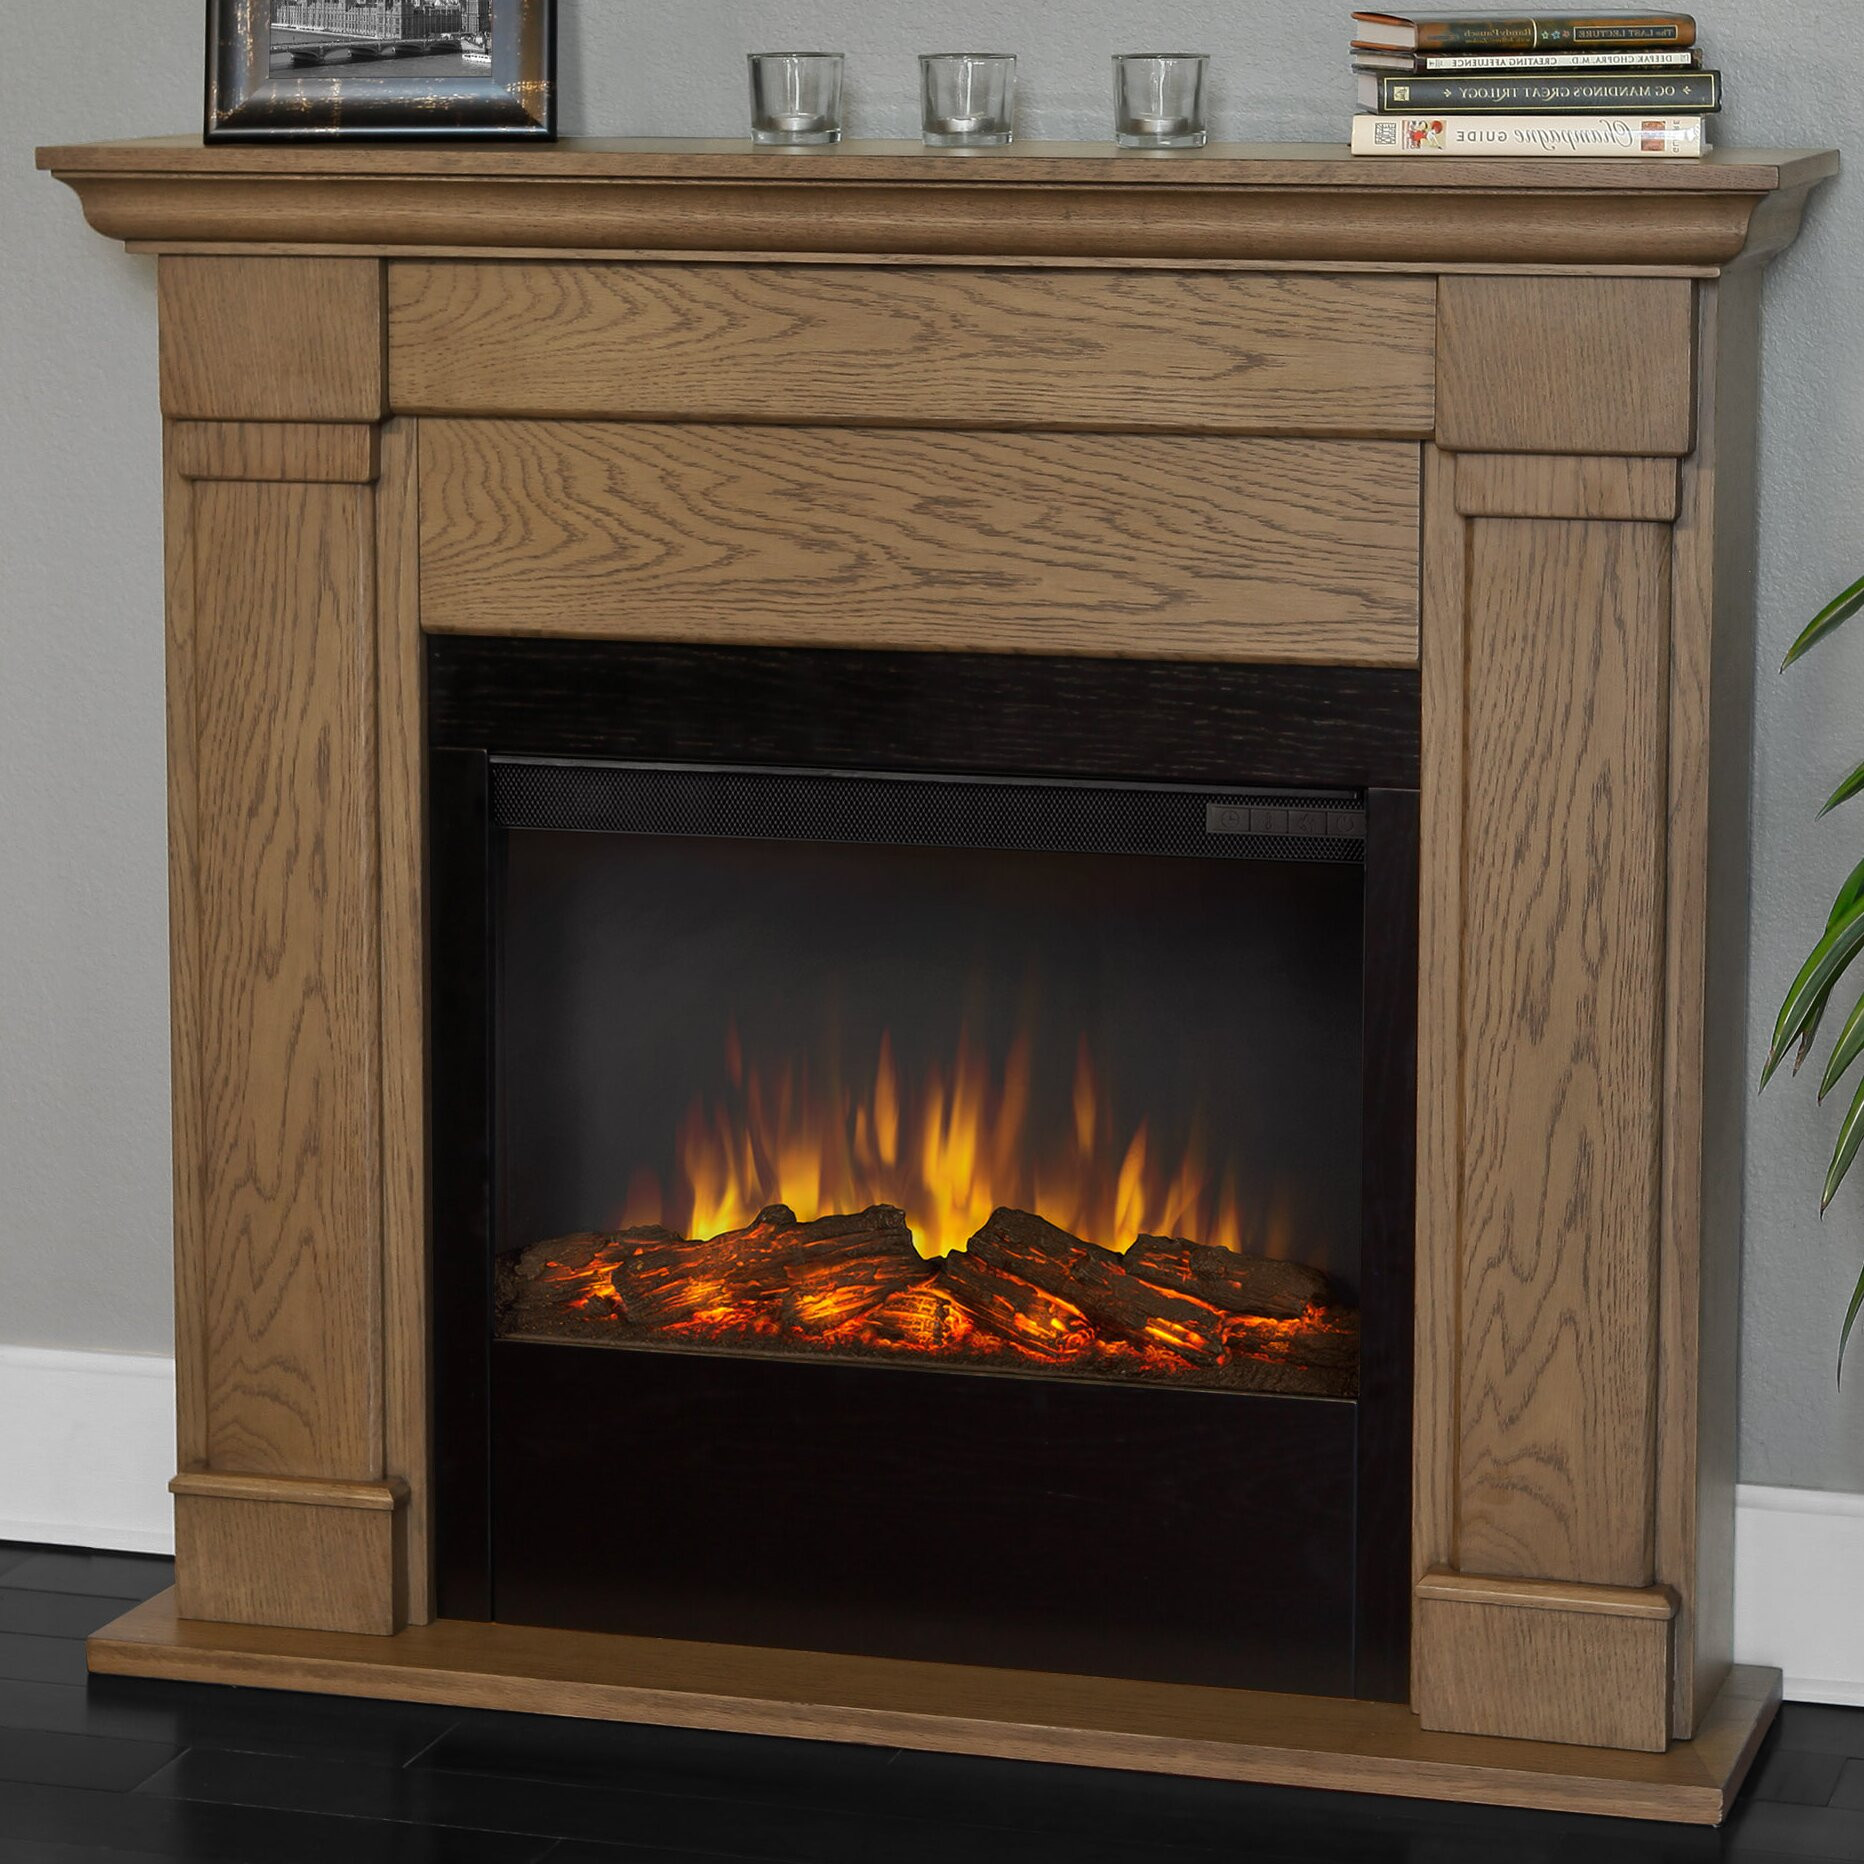 Wall Fireplace Electric
 Real Flame Slim Lowry Wall Mount Electric Fireplace